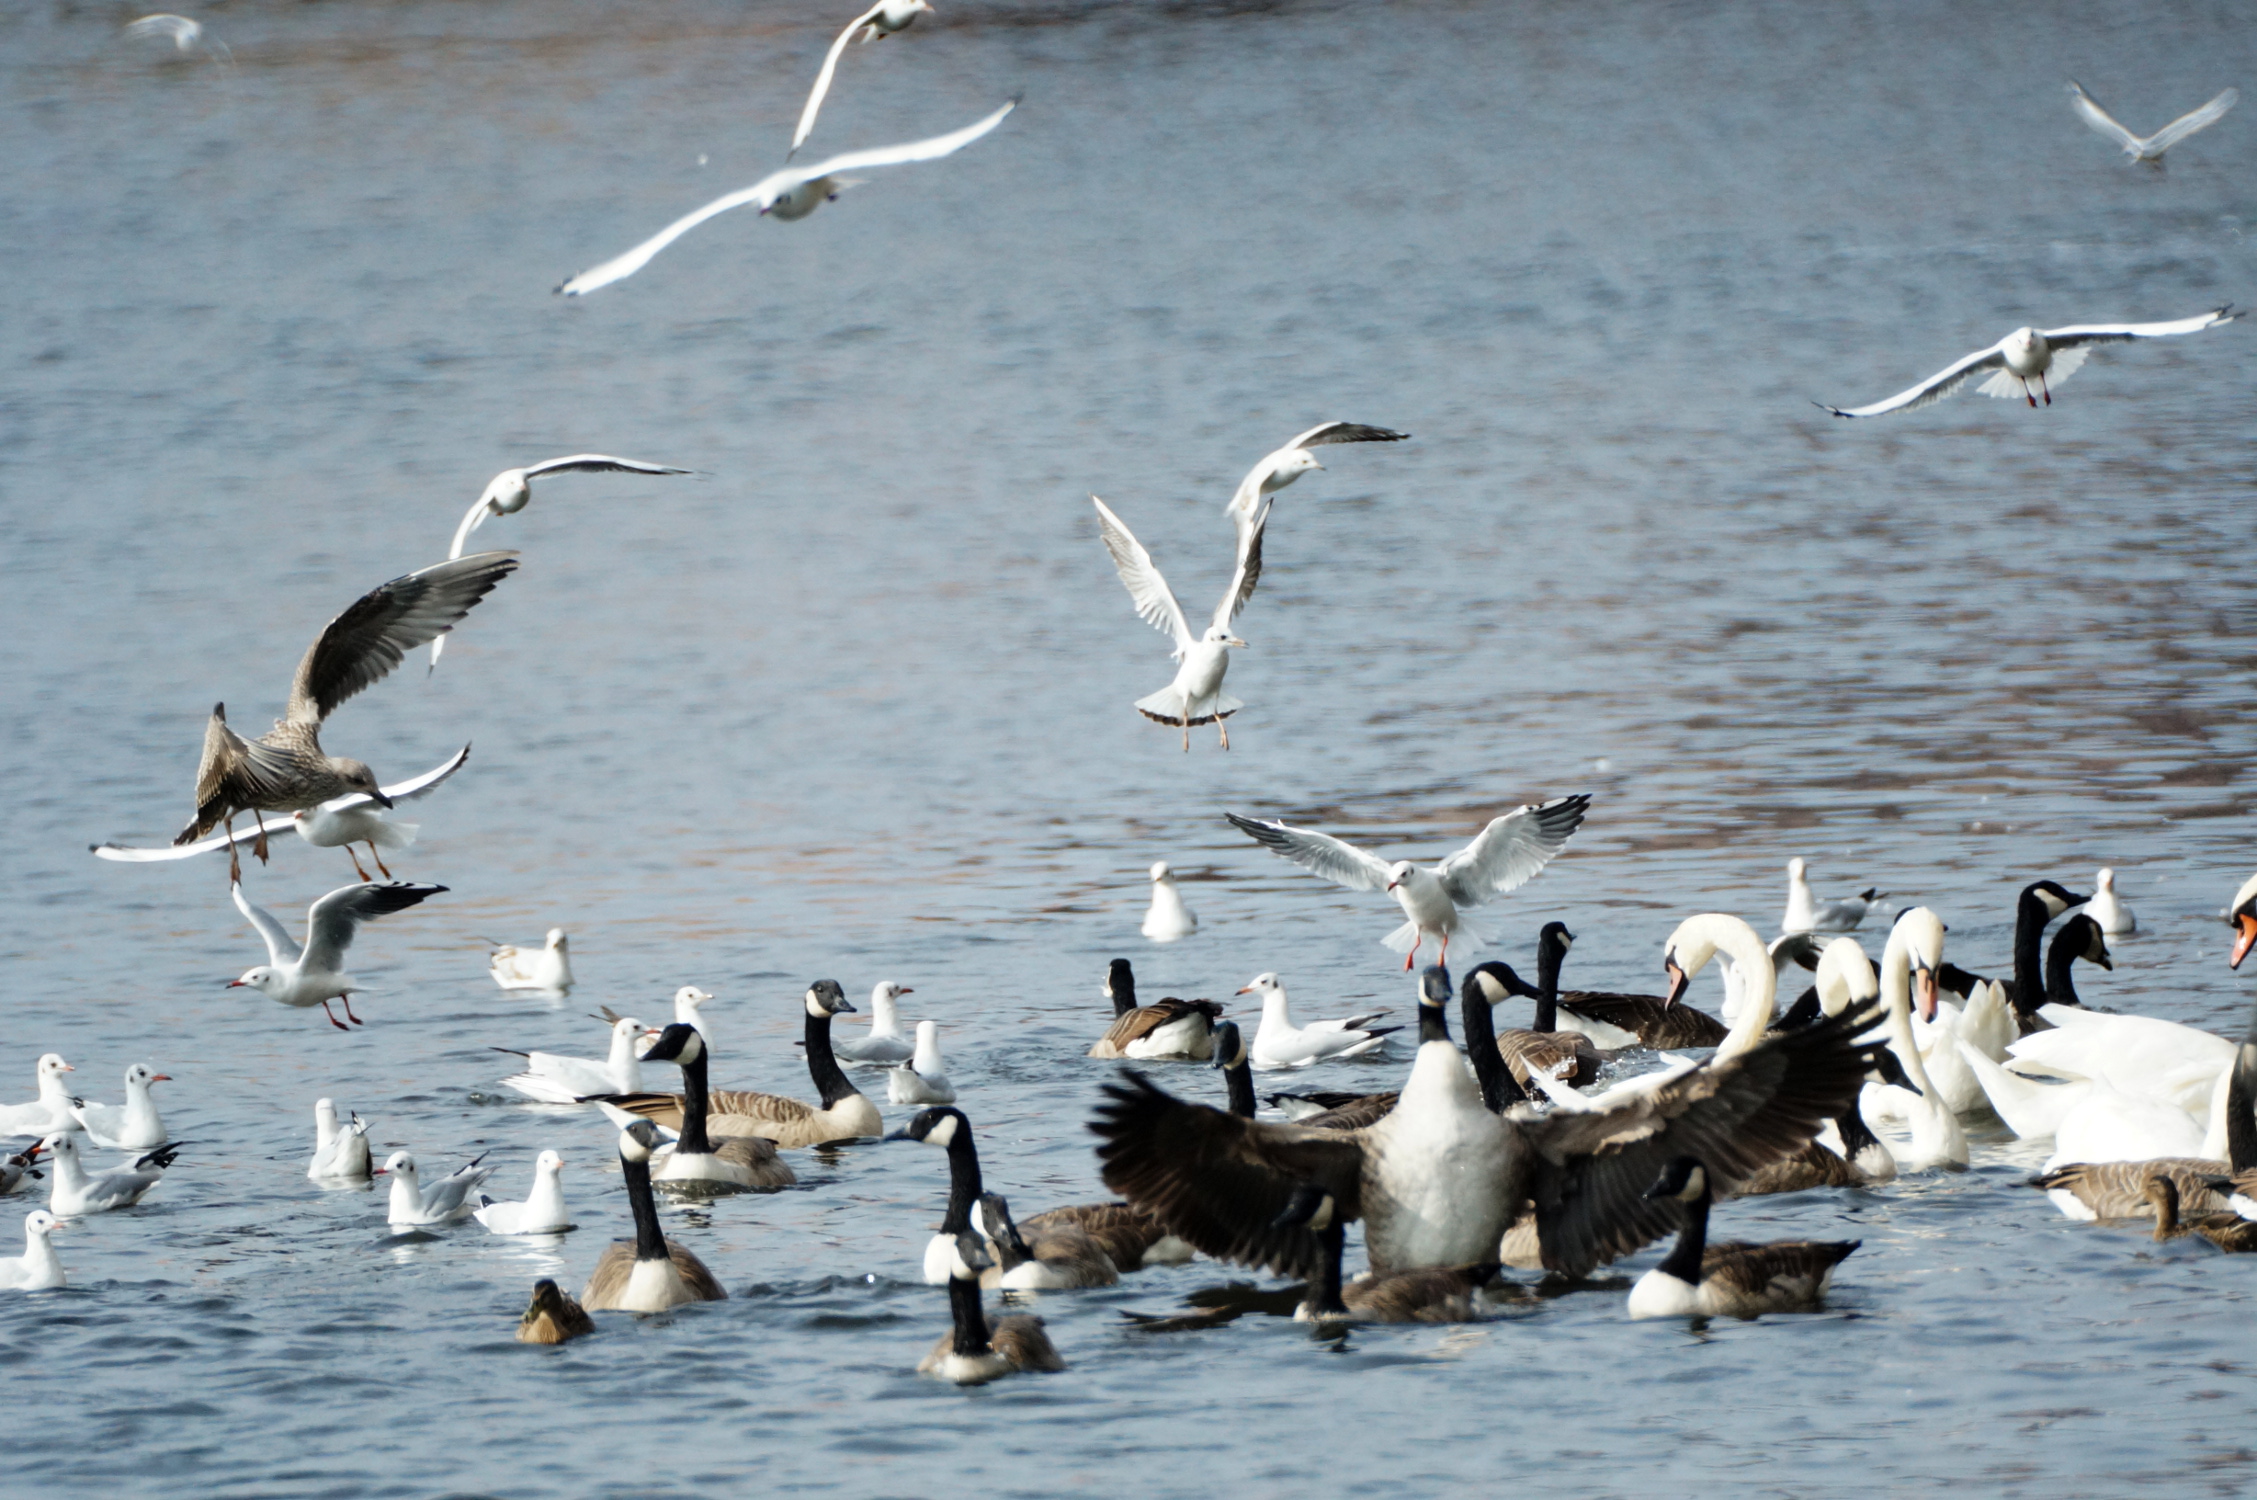 a flock of seagulls and other birds on the water